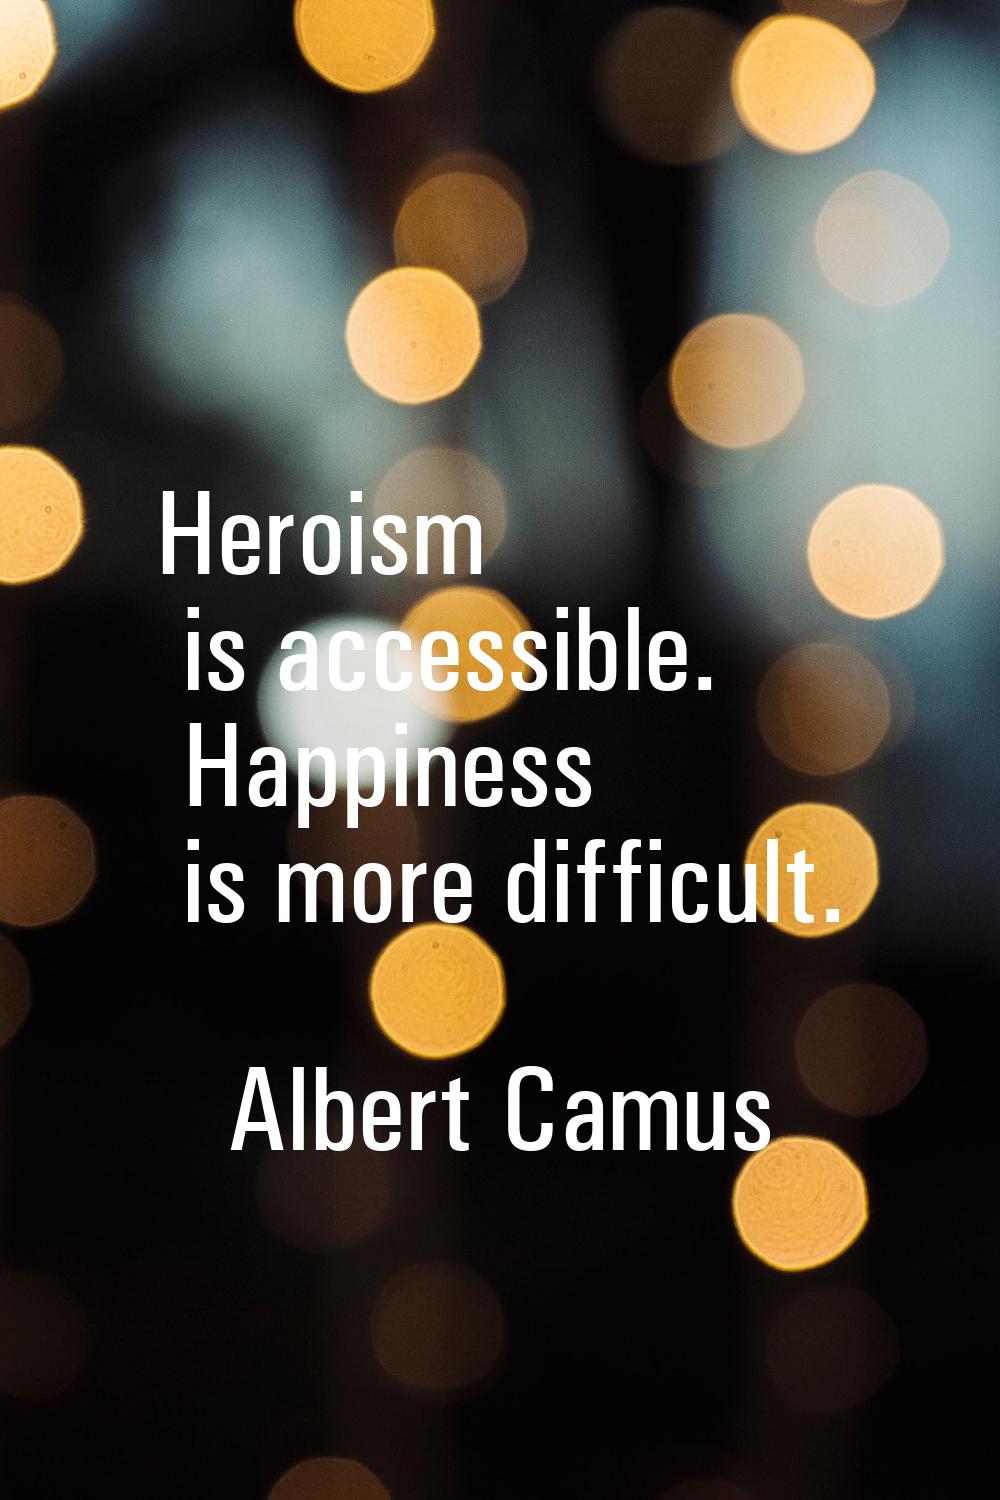 Heroism is accessible. Happiness is more difficult.